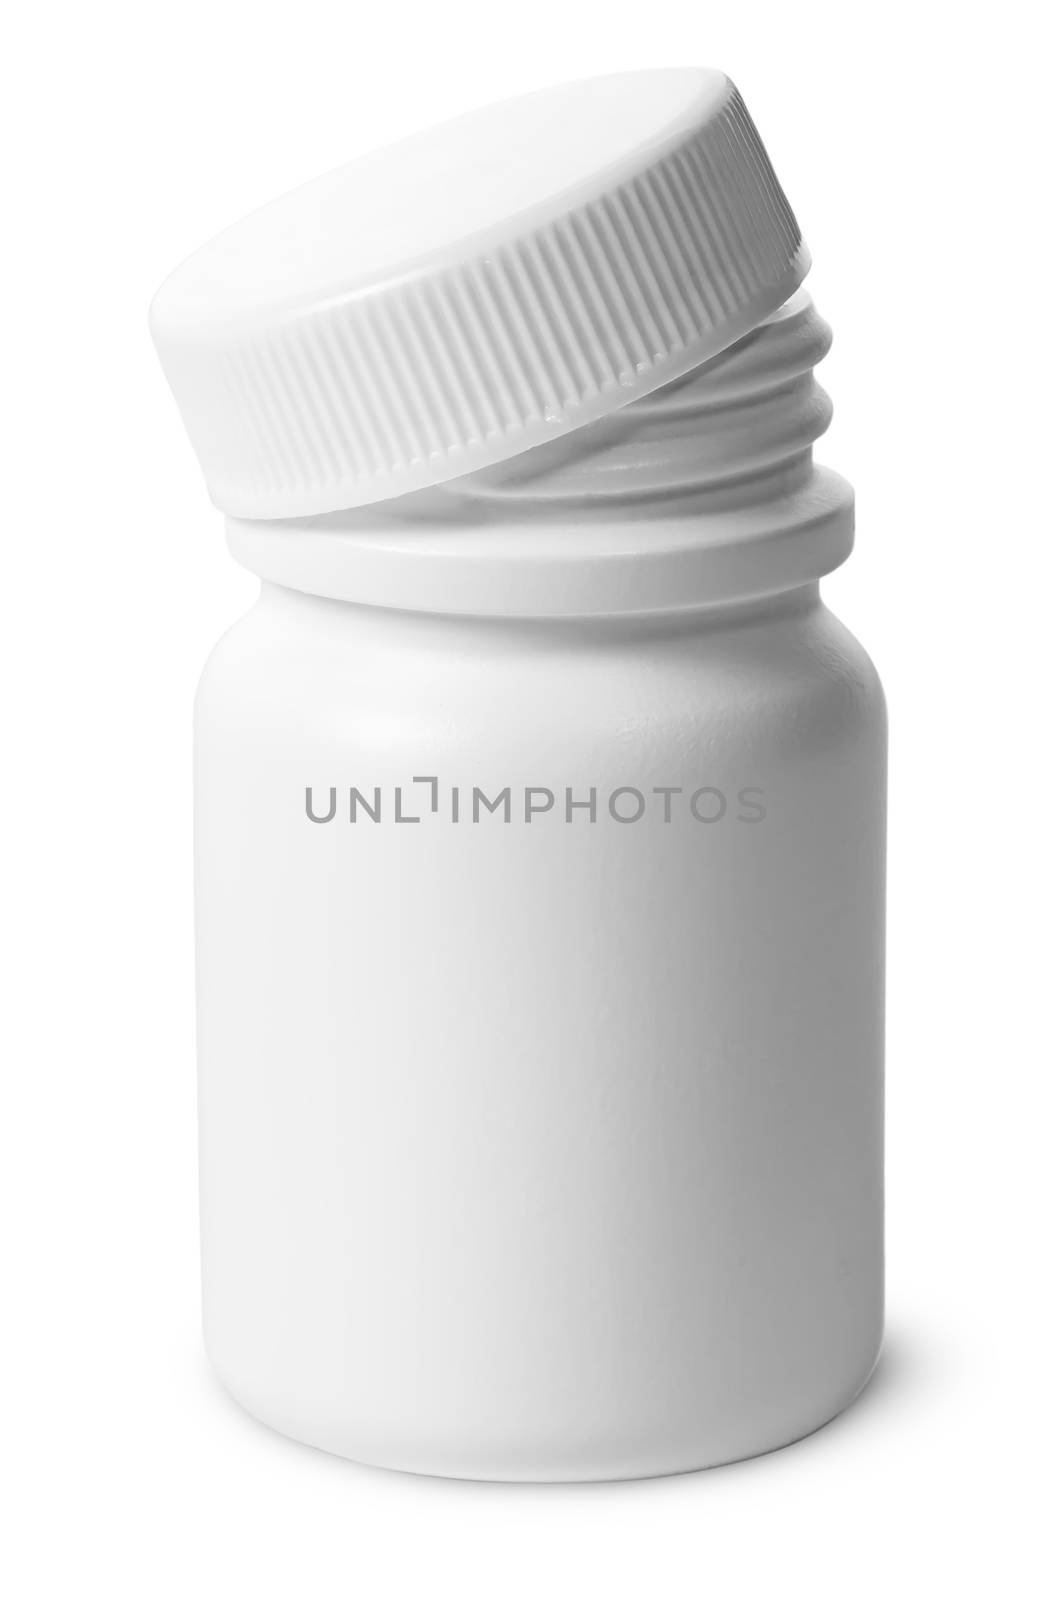 Single plastic bottle with cover removed for pills by Cipariss